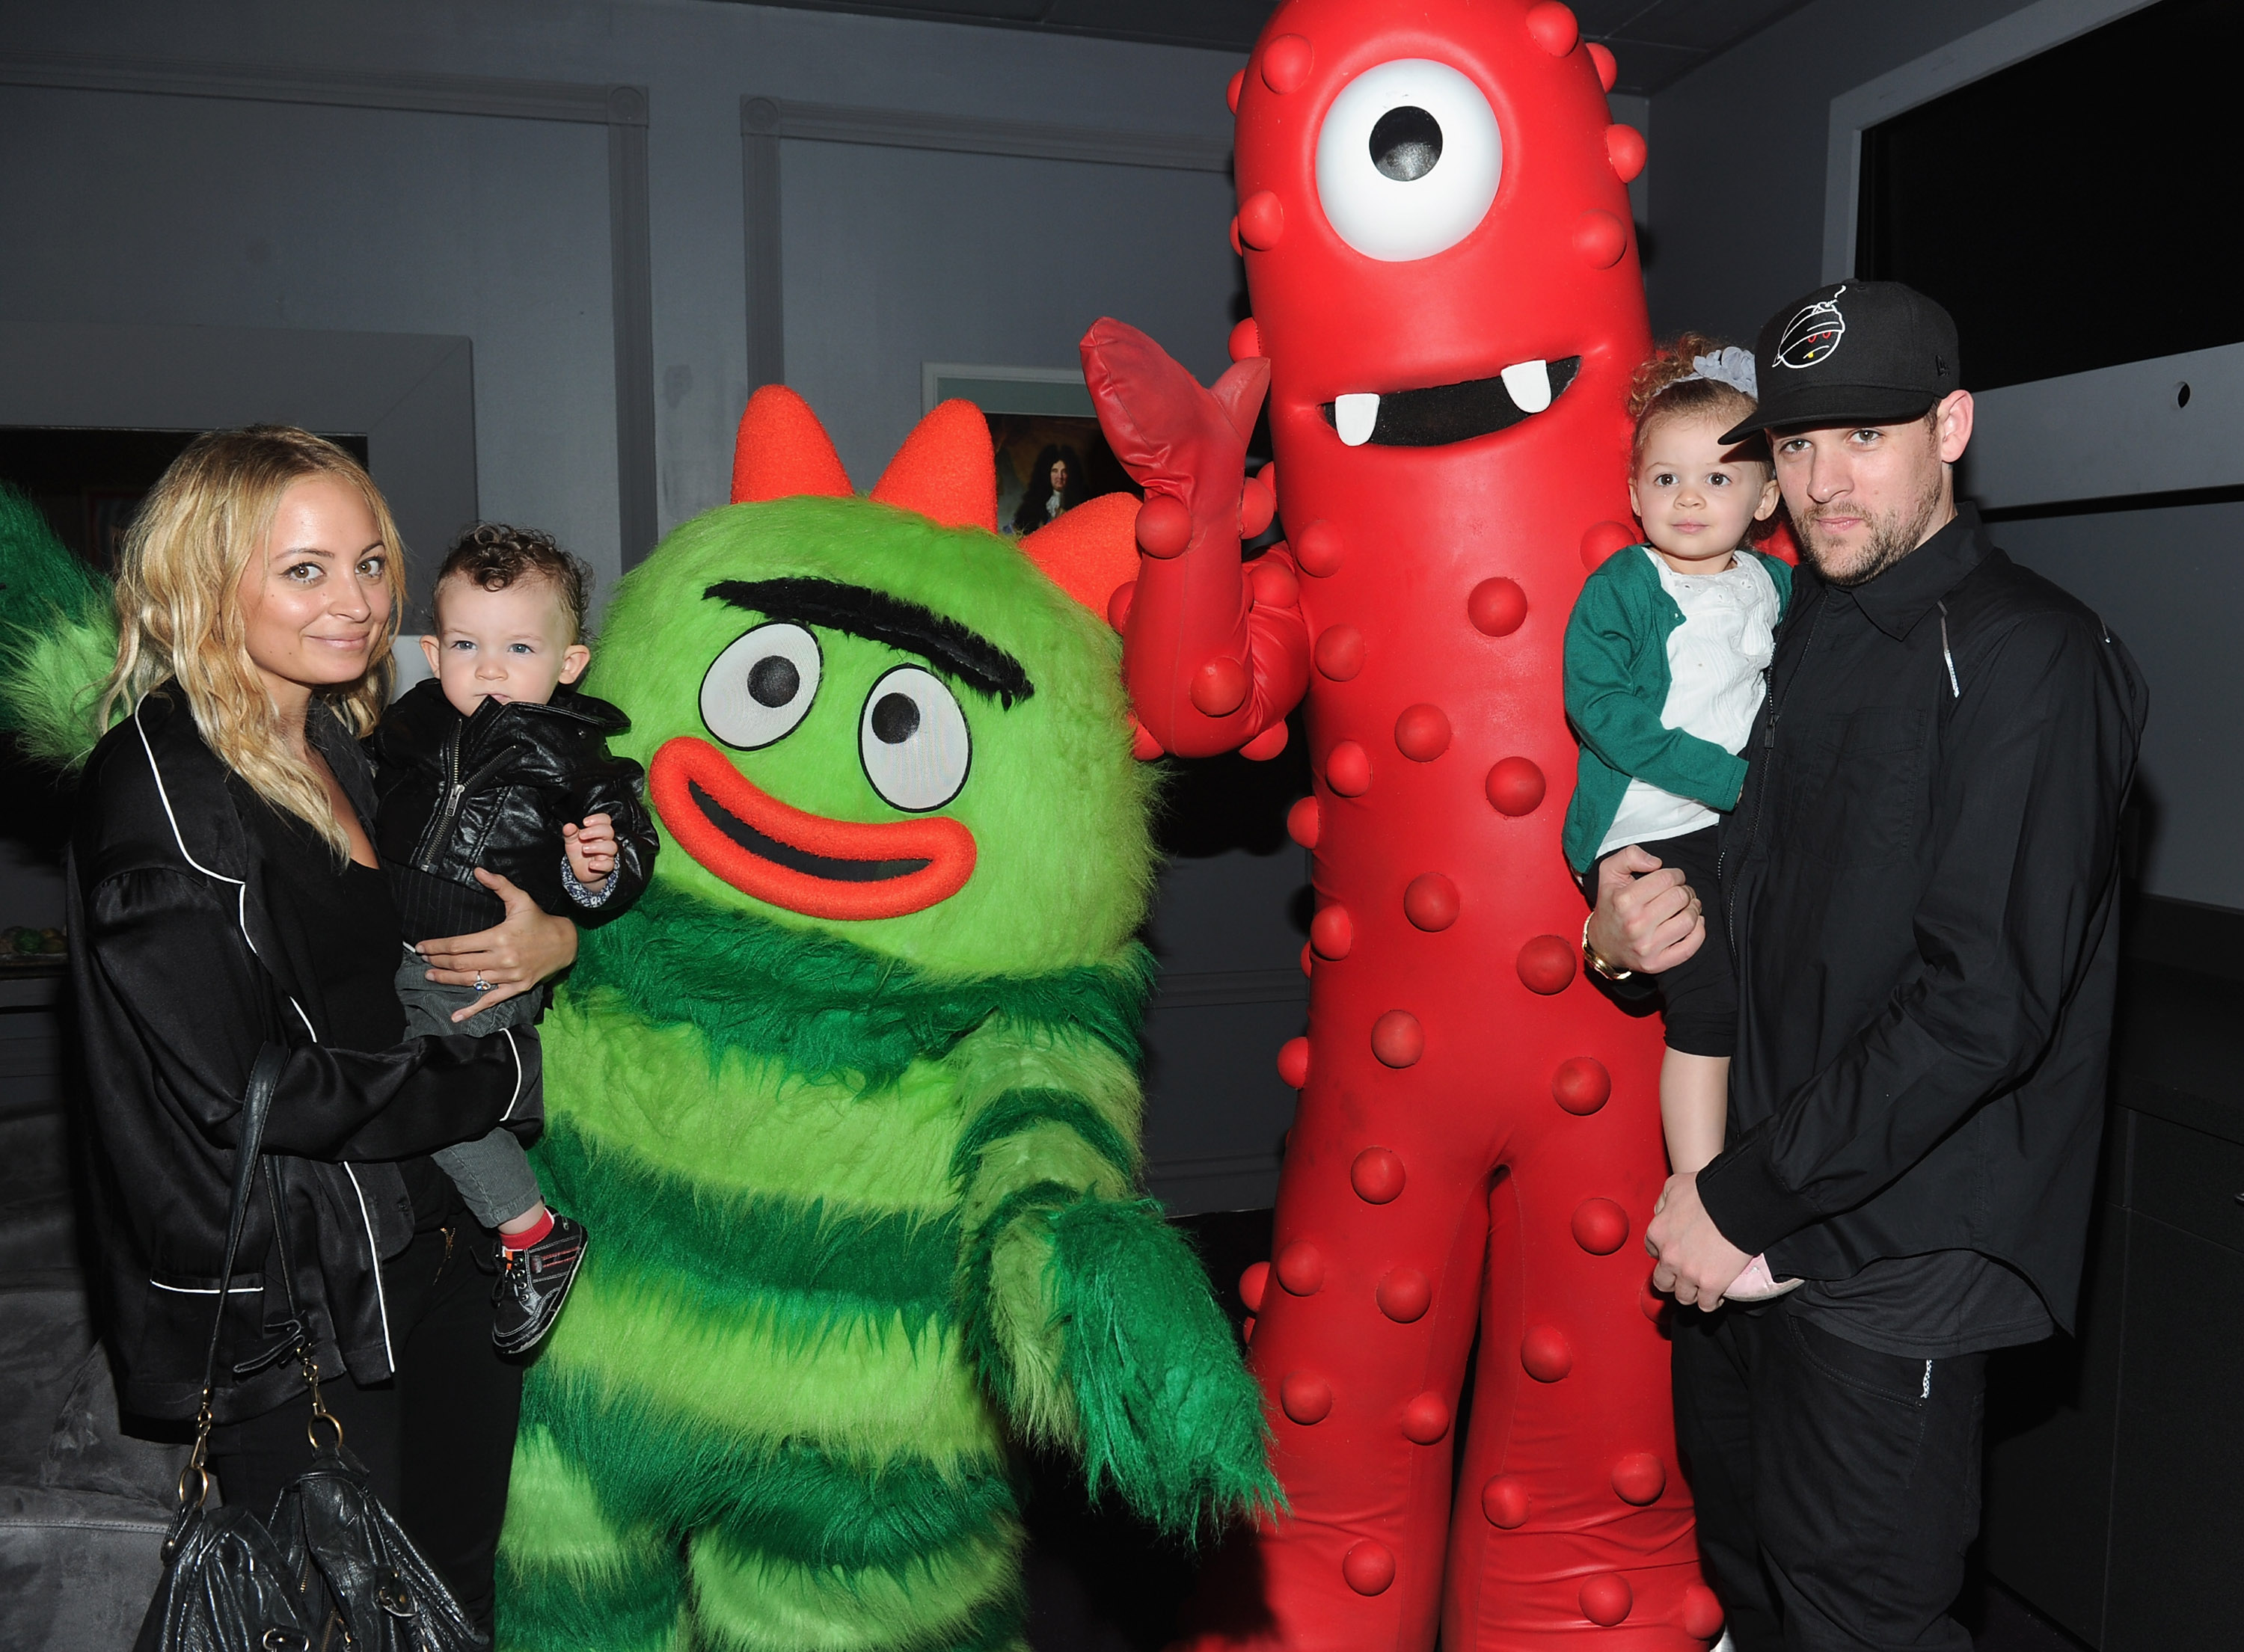 Nicole Richie, Sparrow Madden, Harlow Madden and Joel Madden attend Yo Gabba Gabba! Live! There's A Party In My City at Nokia L.A. Live on November 27, 2010 in Los Angeles, California. | Source: Getty Images